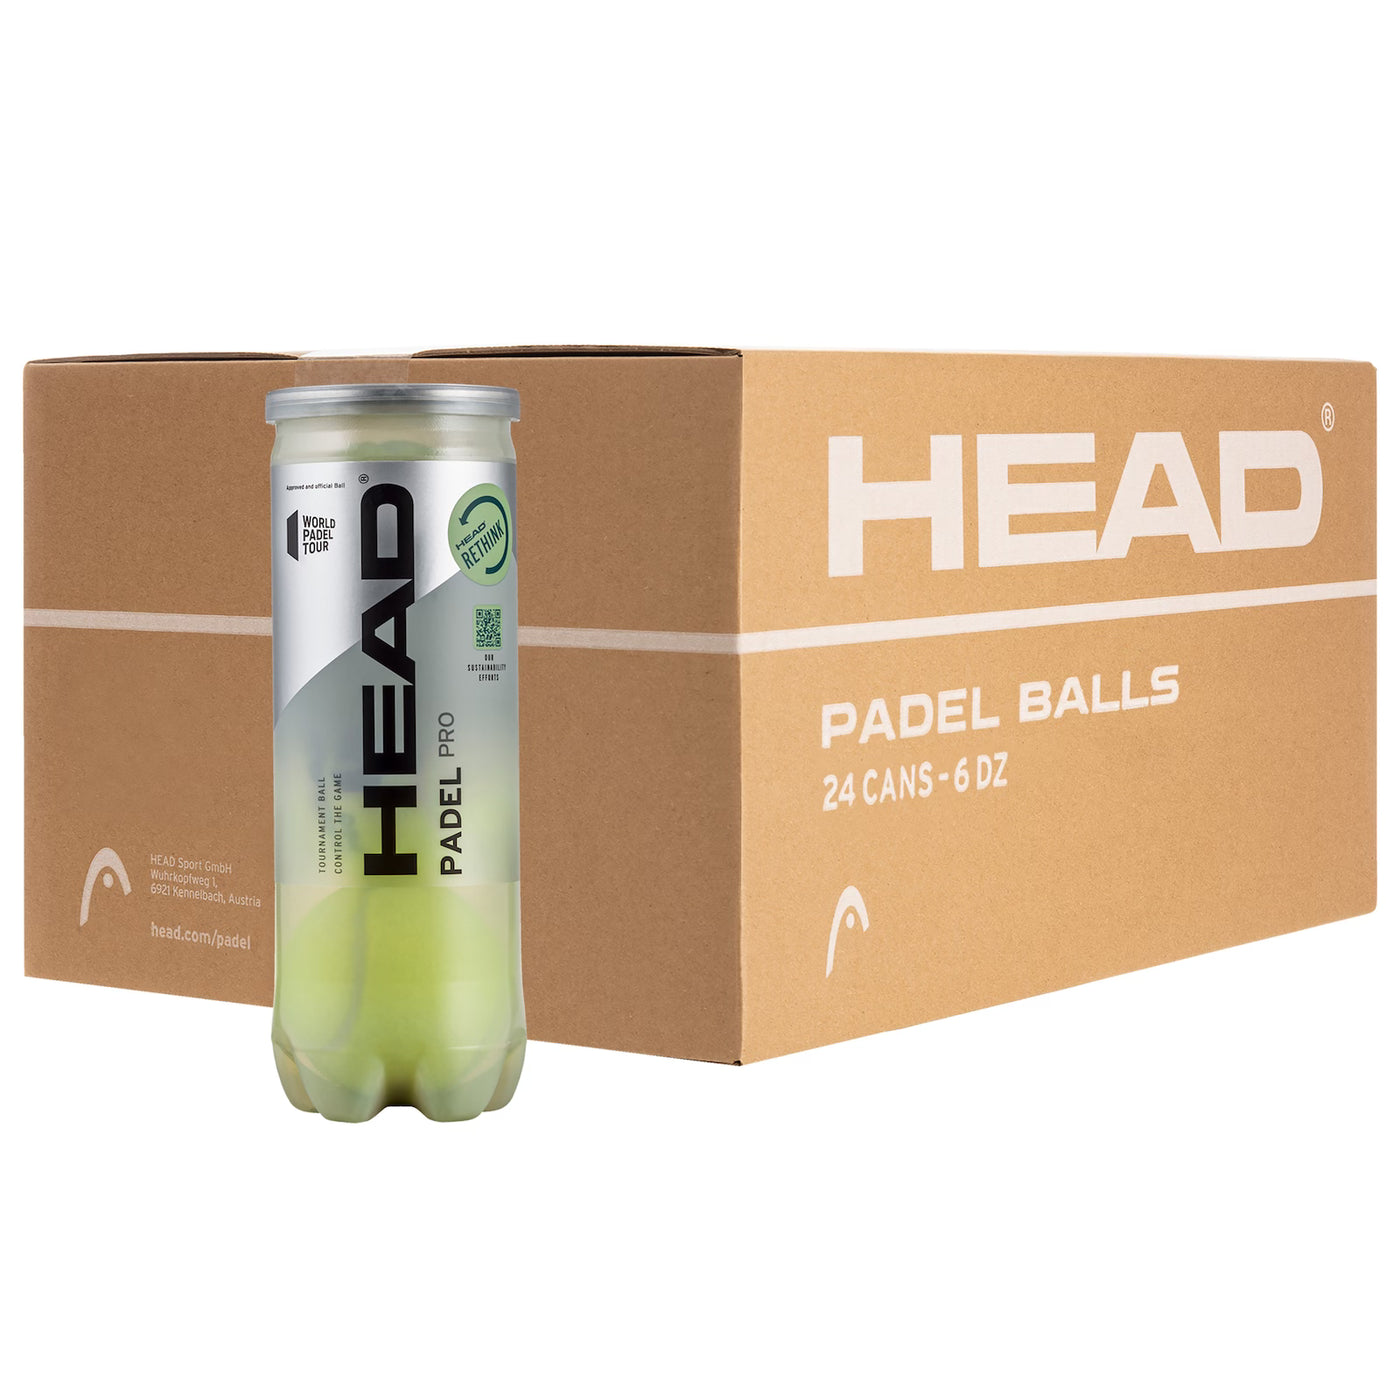 Head Padel Pro Ball Case (24 Cans)